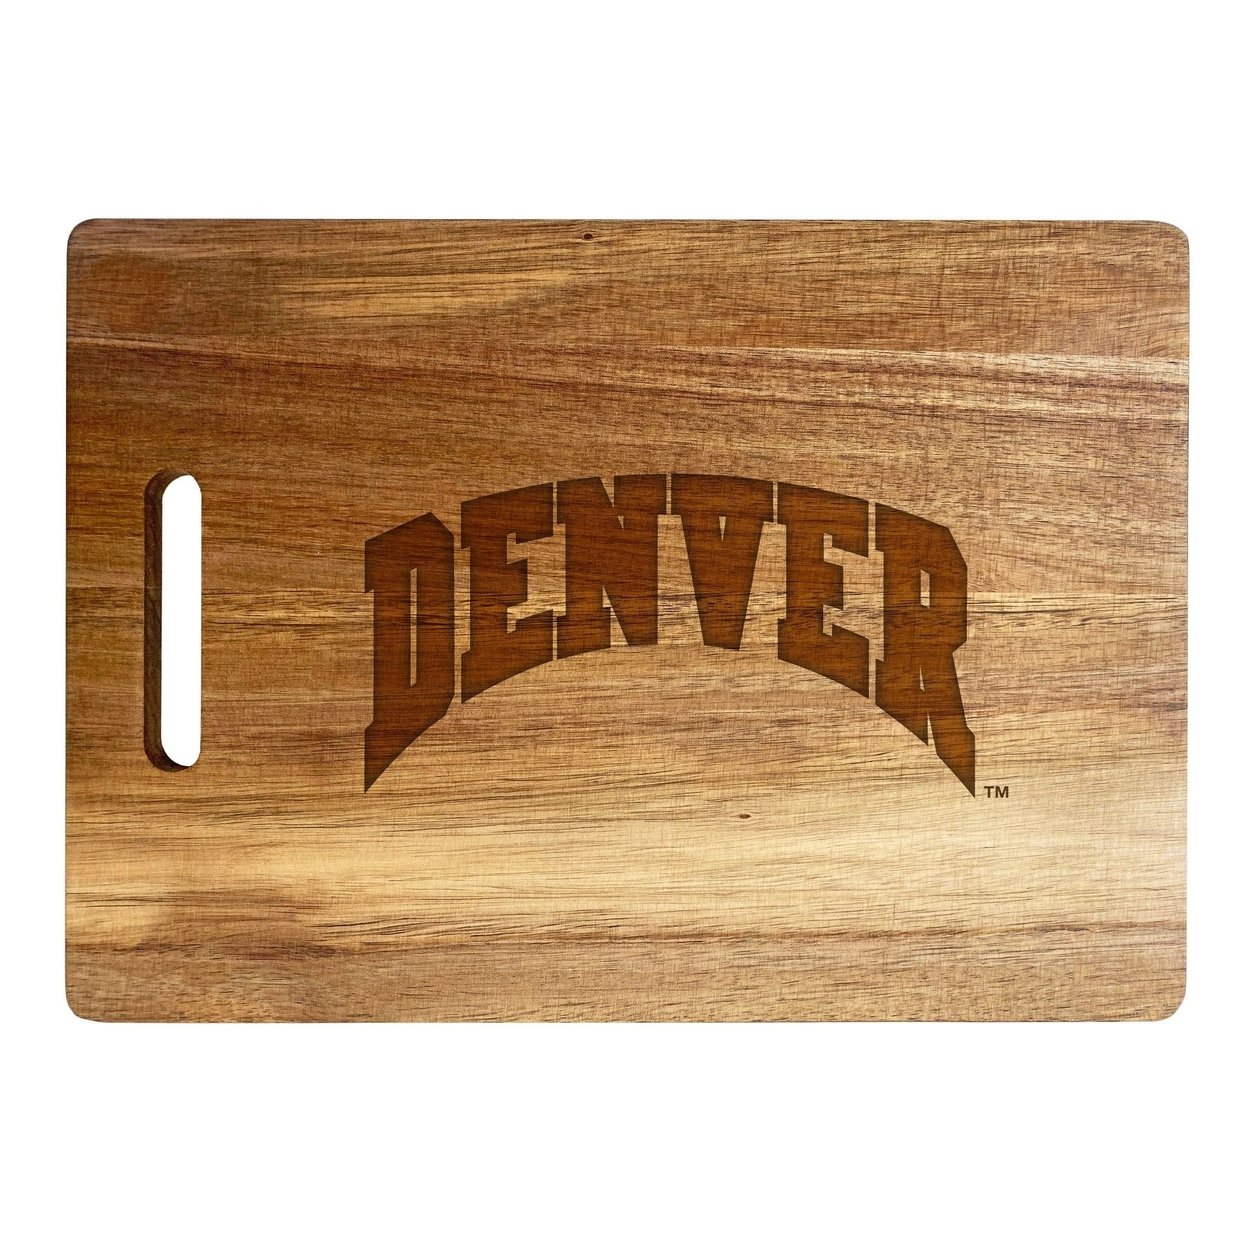 University Of Denver Pioneers Engraved Wooden Cutting Board 10 X 14 Acacia Wood - Large Engraving